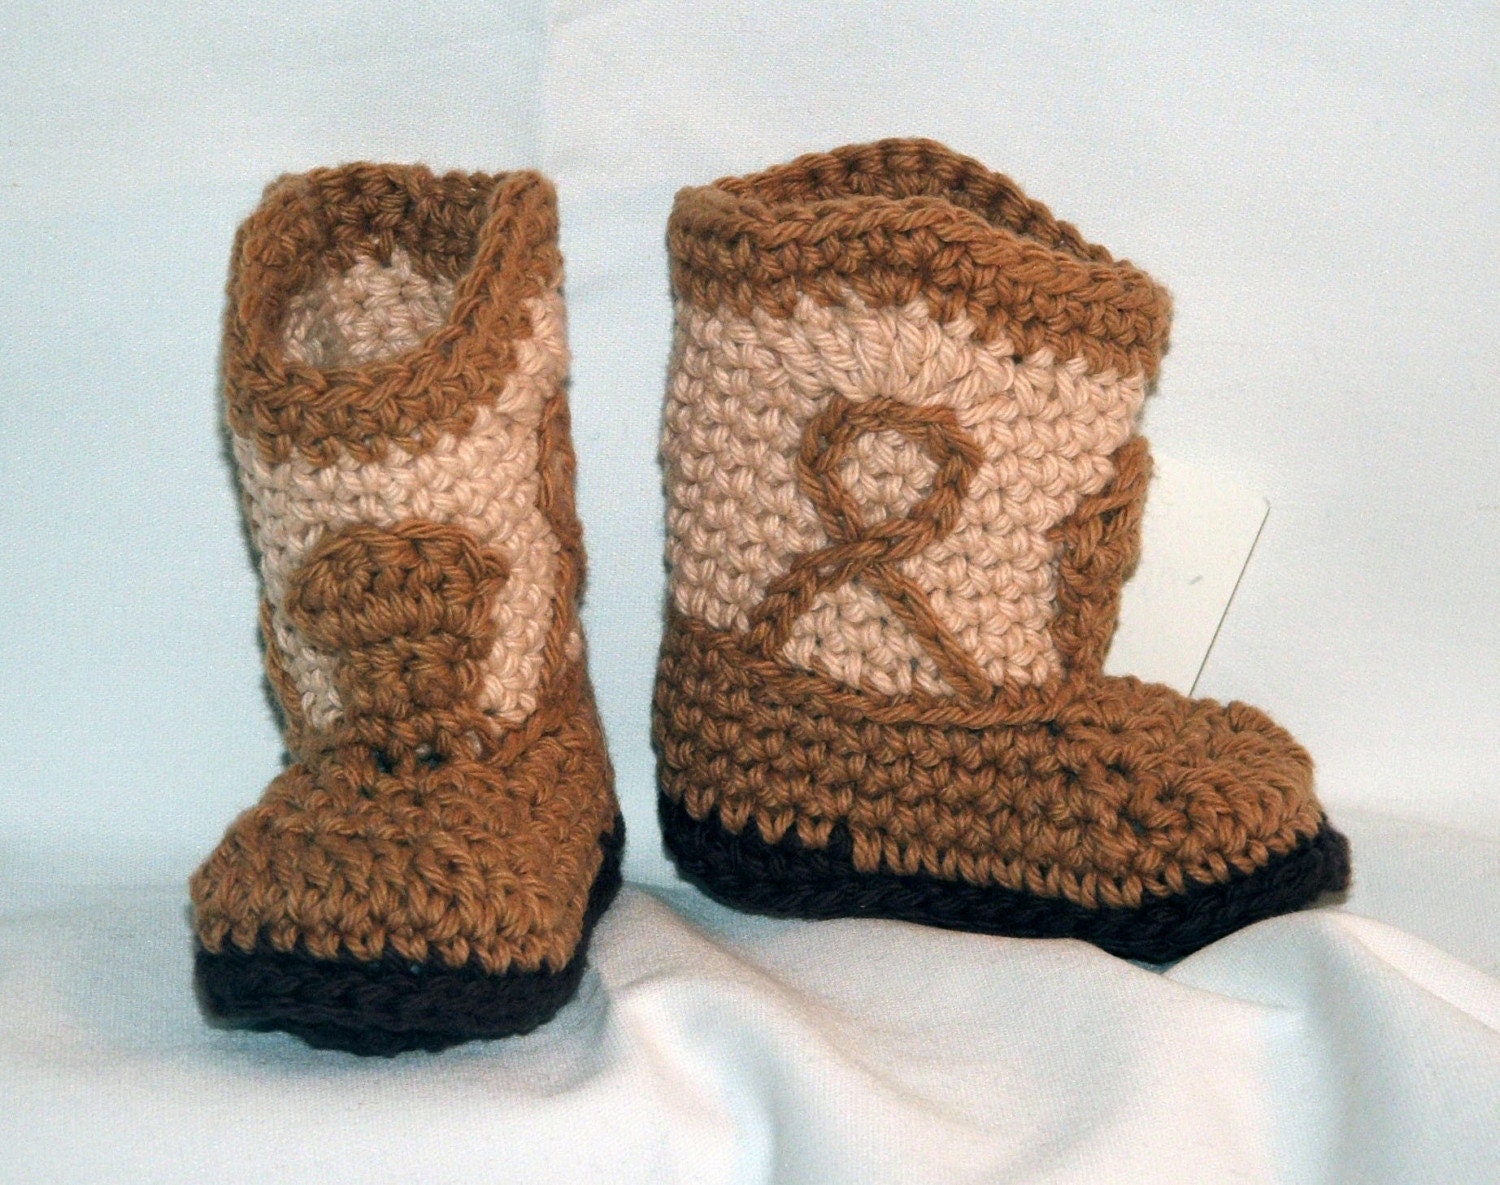 Tan Cowboy Booties, MEDIUM size, that look like real cowboy boots